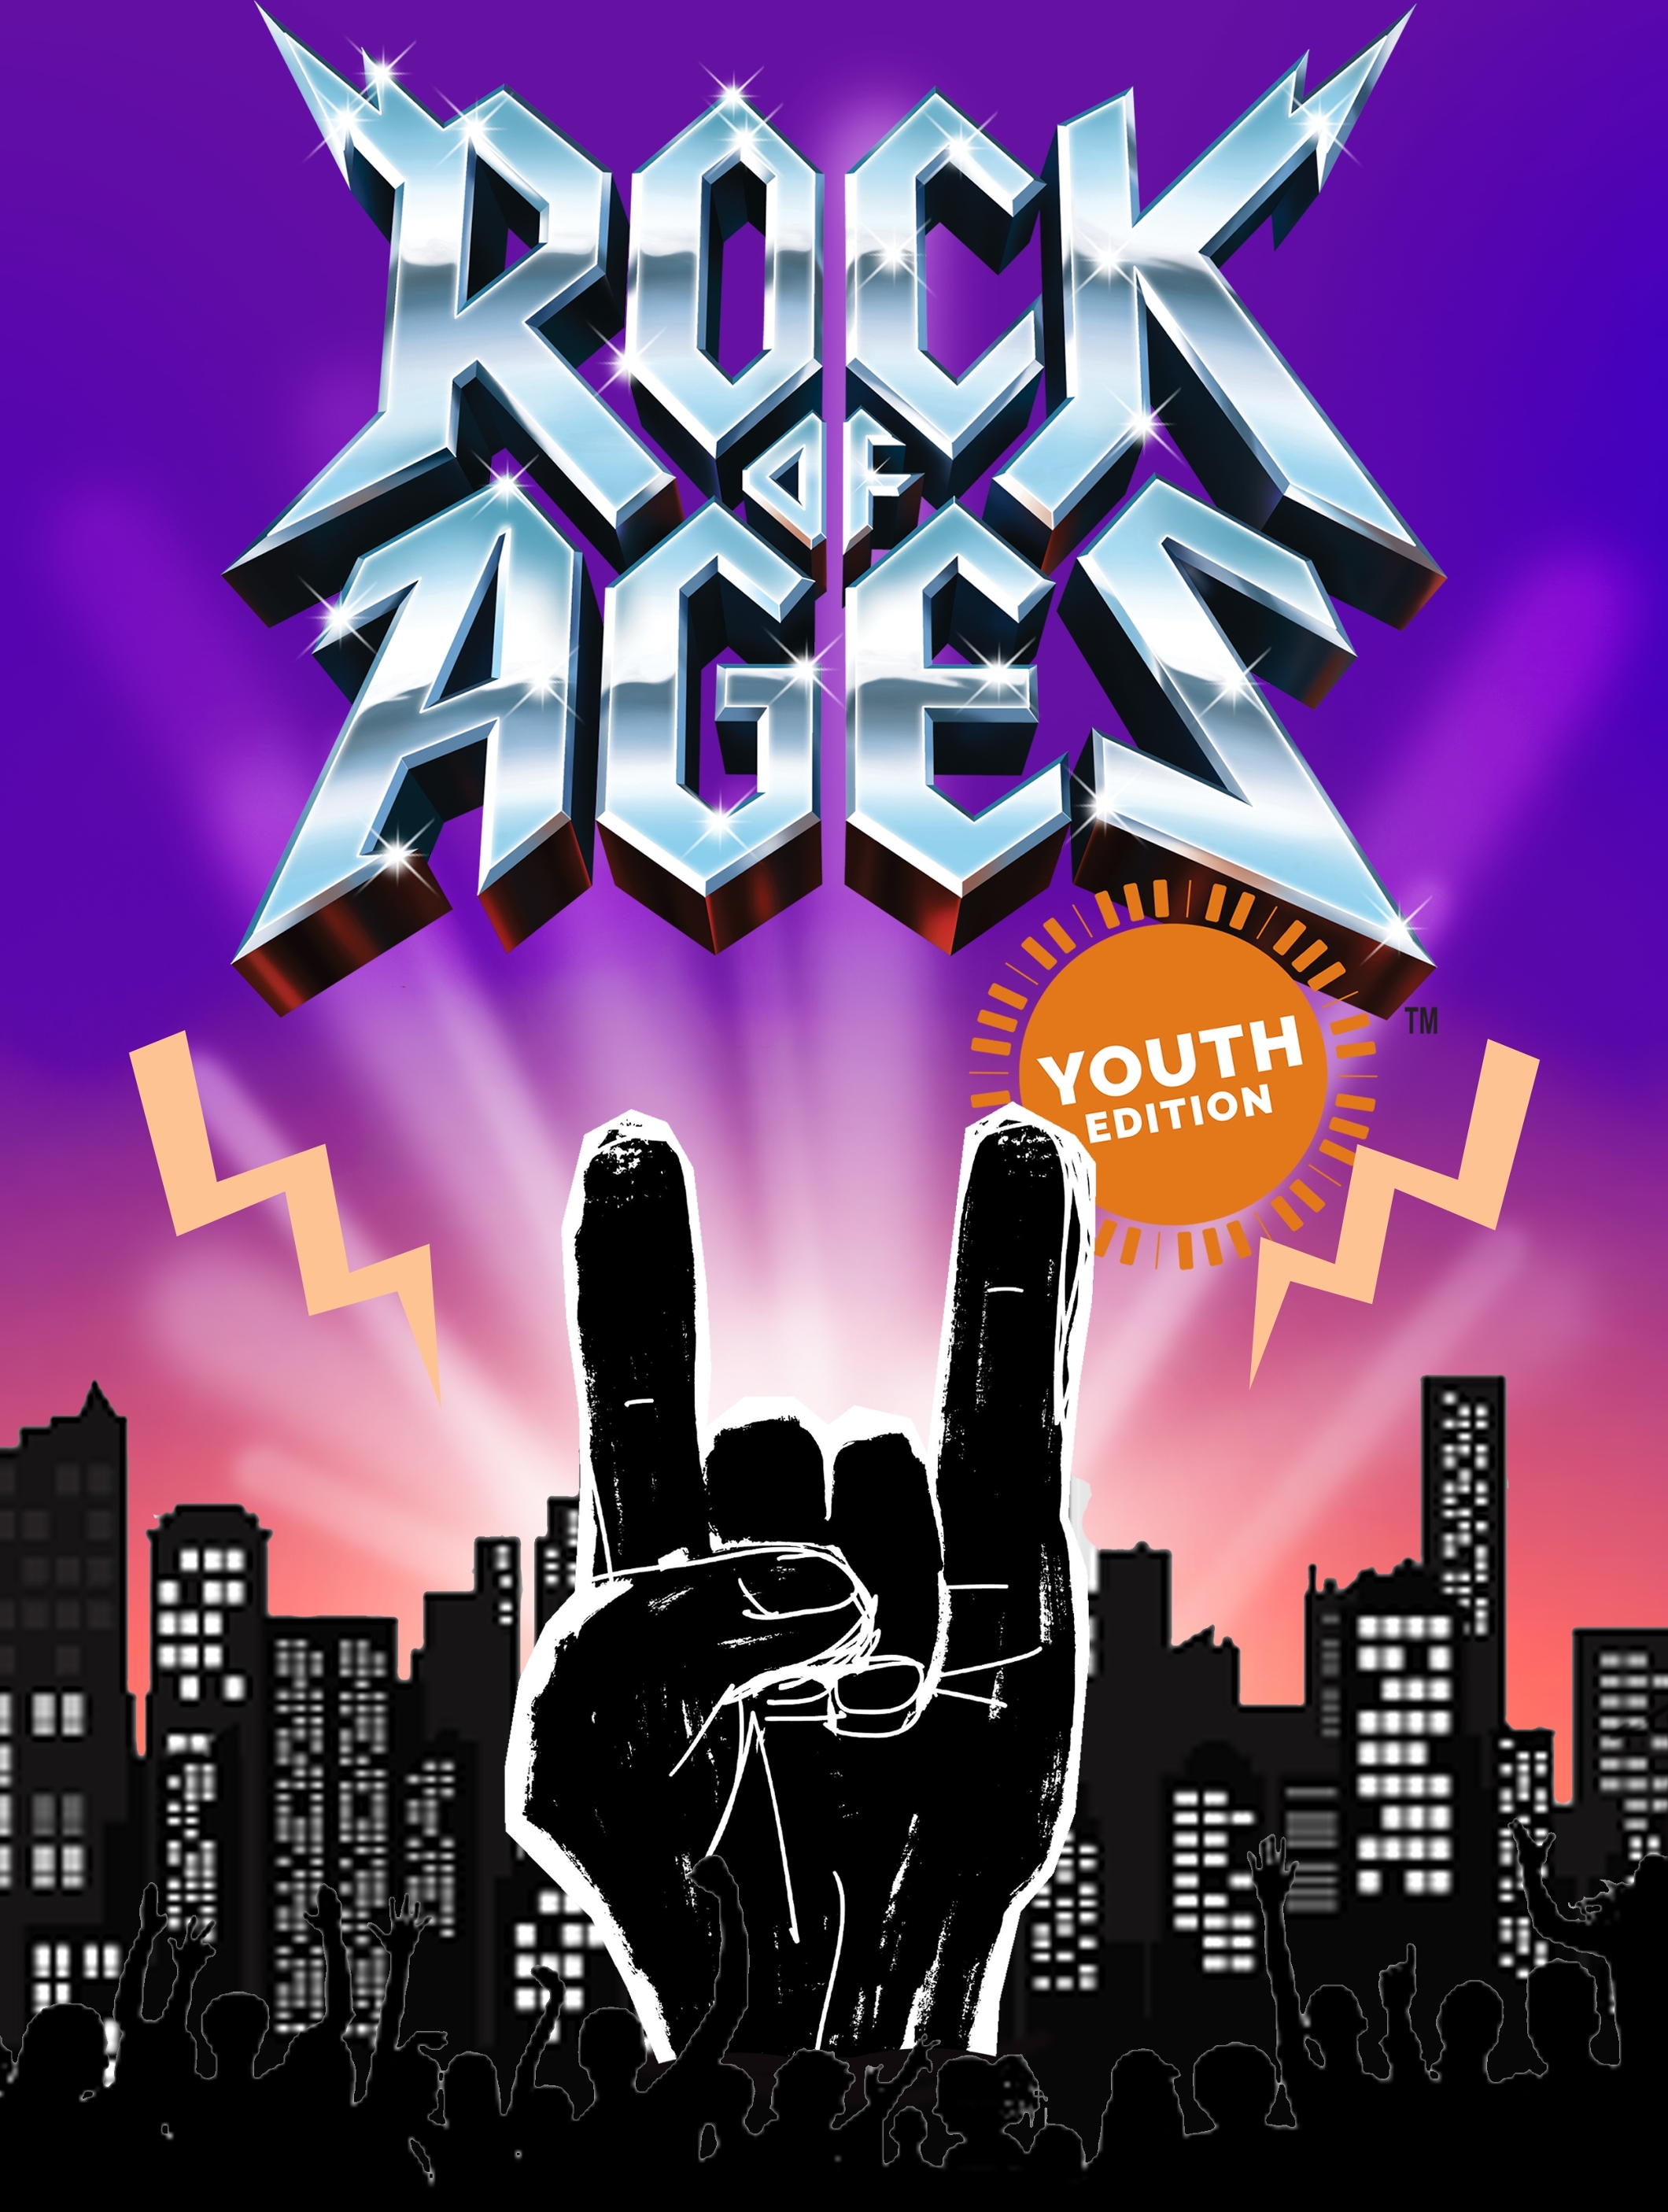 rock of ages poster